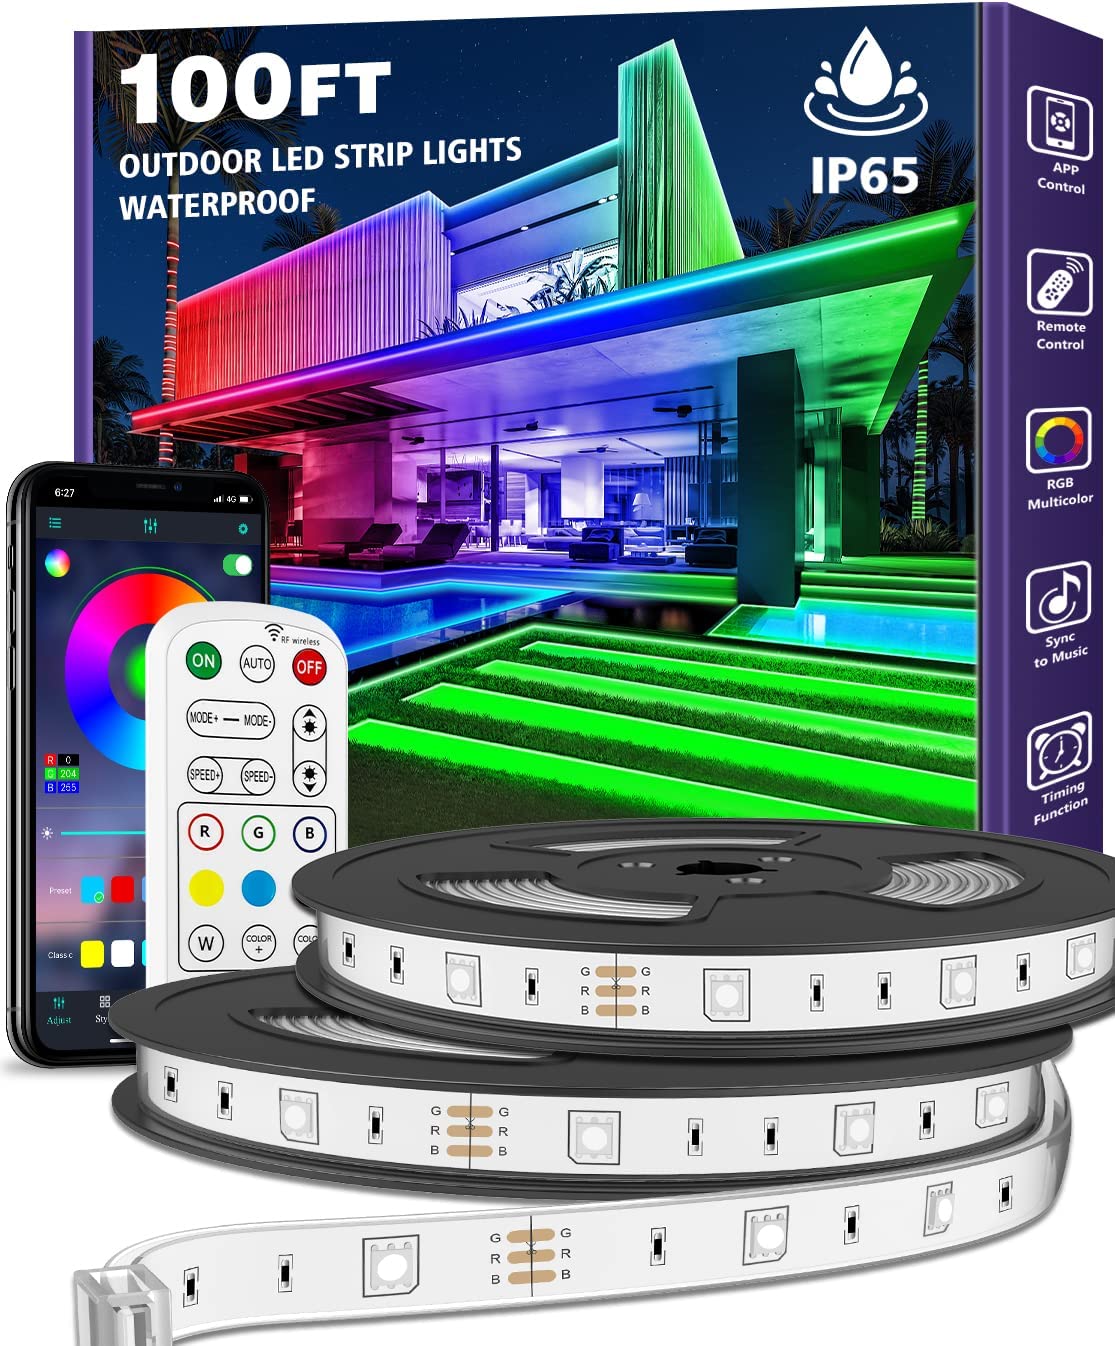 AILBTON 100ft Outdoor LED Strip Lights Waterproof,IP65 Outside Led Light Strips Waterproof with Bluetooth App Remote Control ,Music Sync RGB Exterior Led Rope Lights,for Balcony,Deck,Roof,Garden,Pool